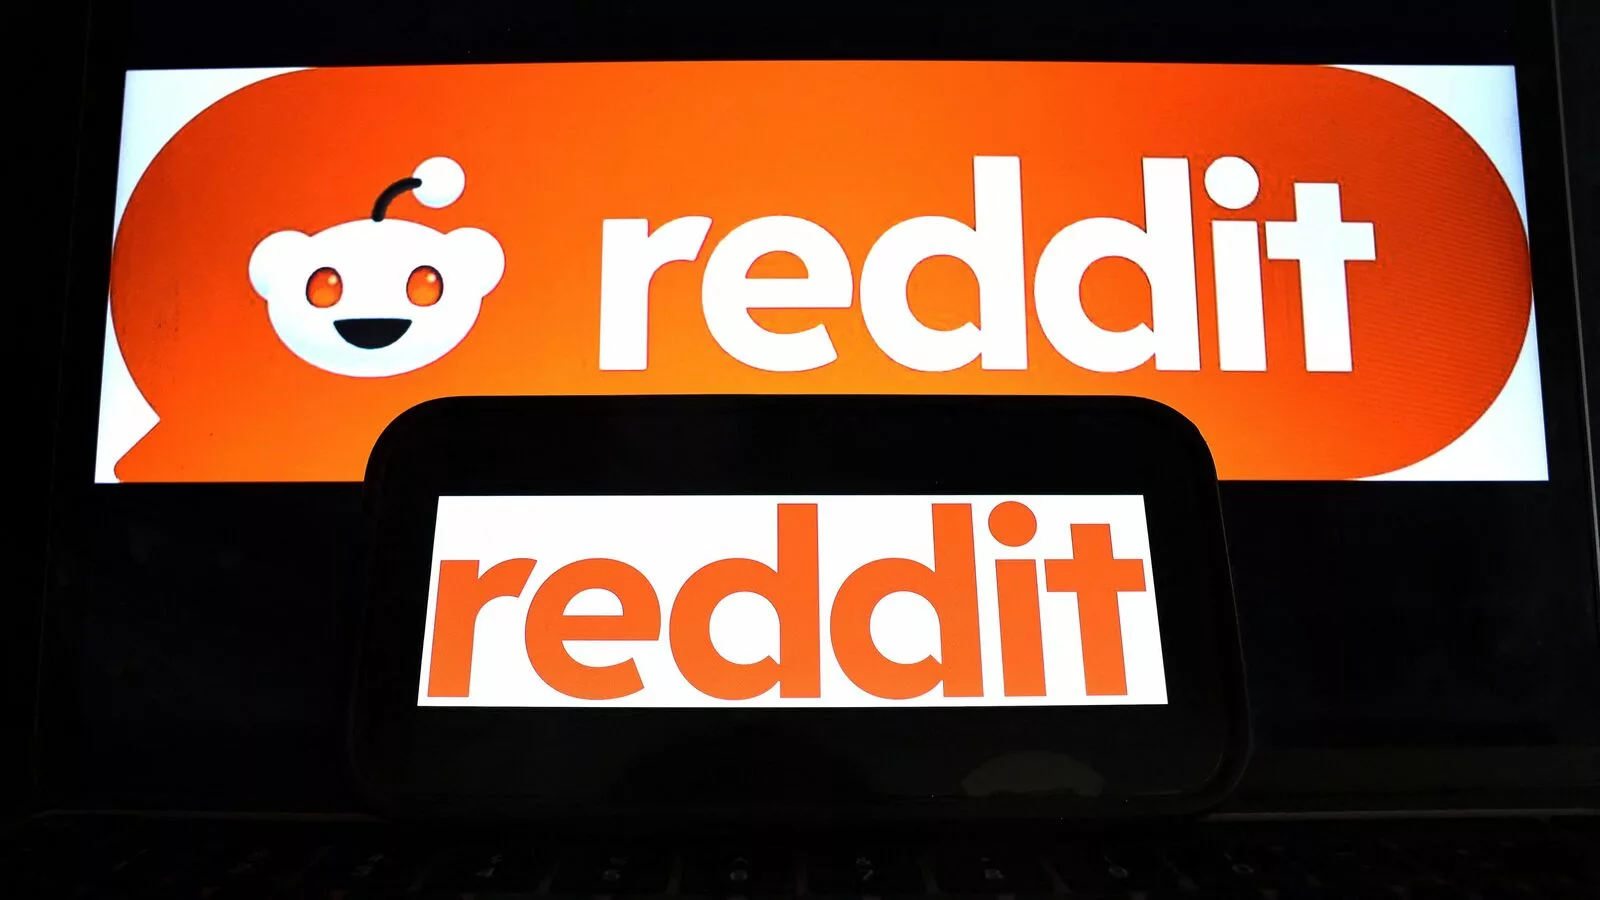 Reddit reportedly signed a multi-million content licensing deal with an AI company